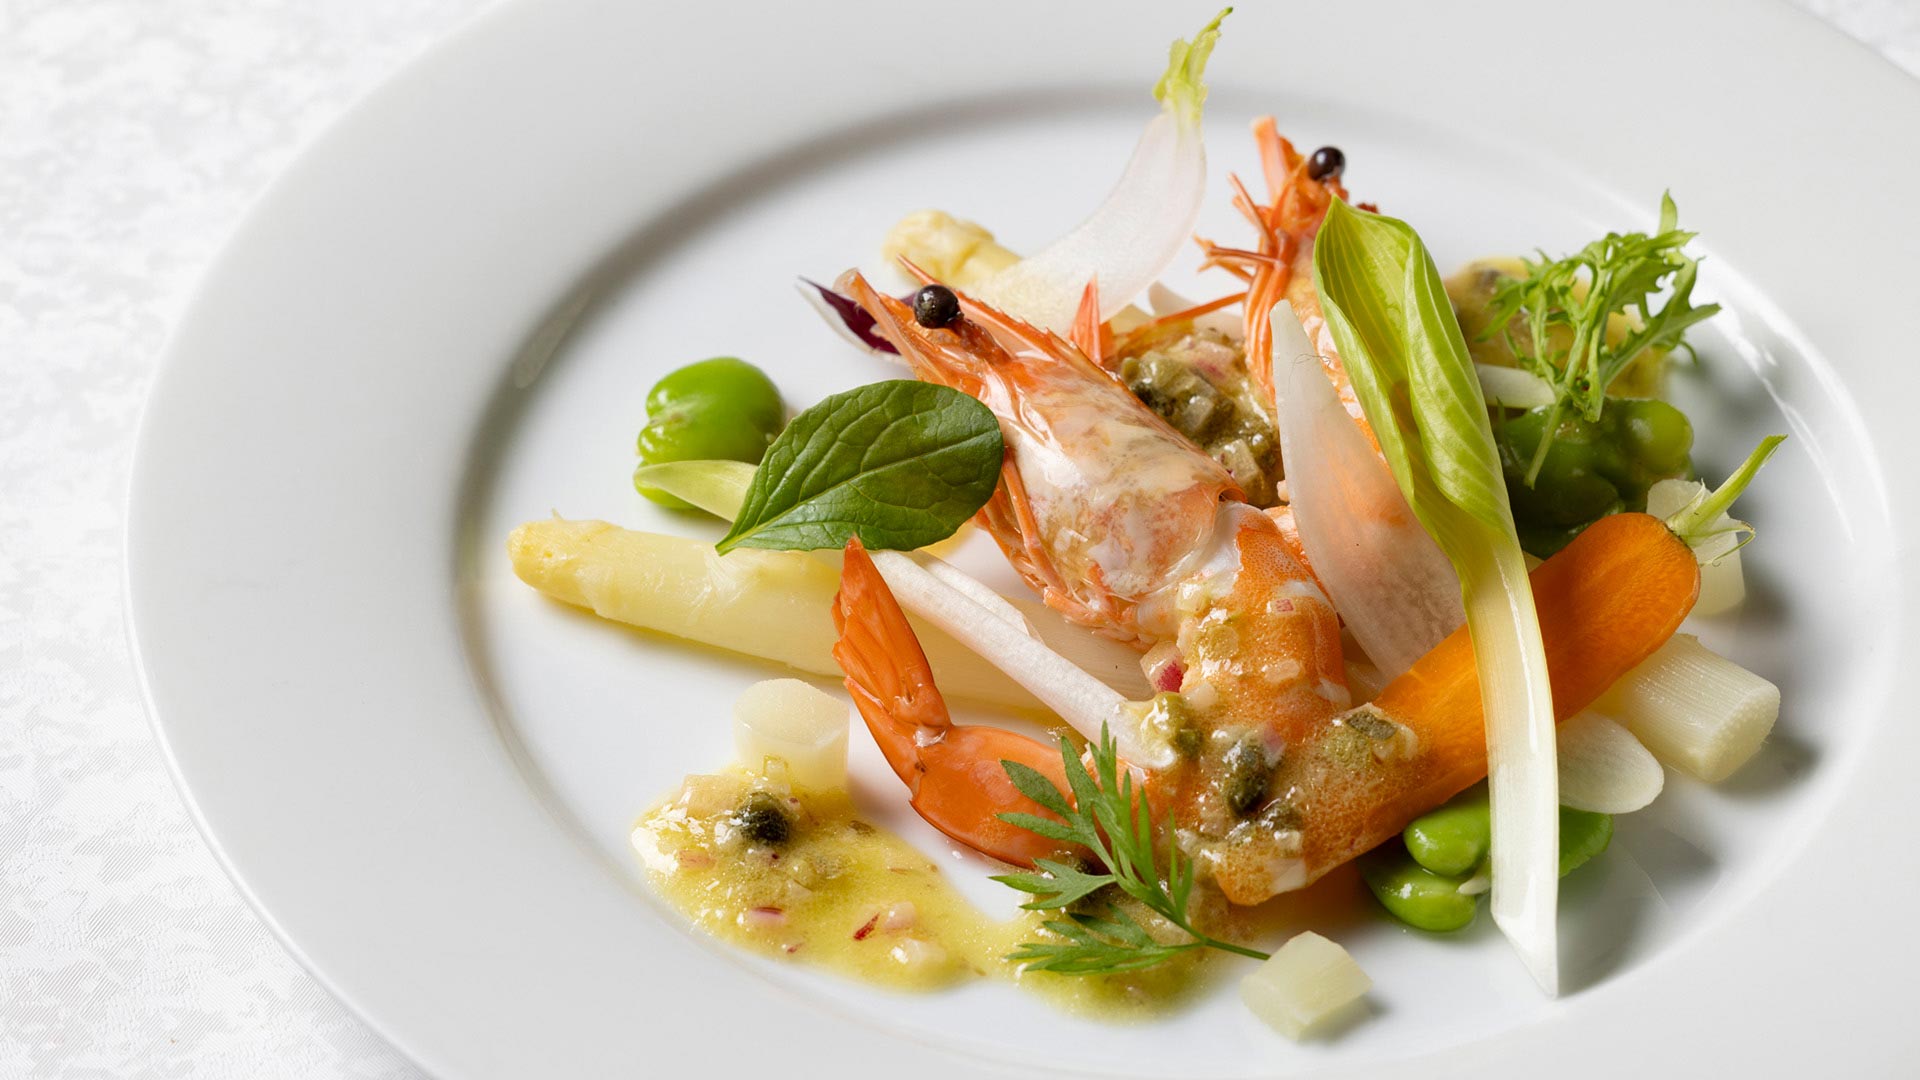 French Dinner Course focus on White Asparagus